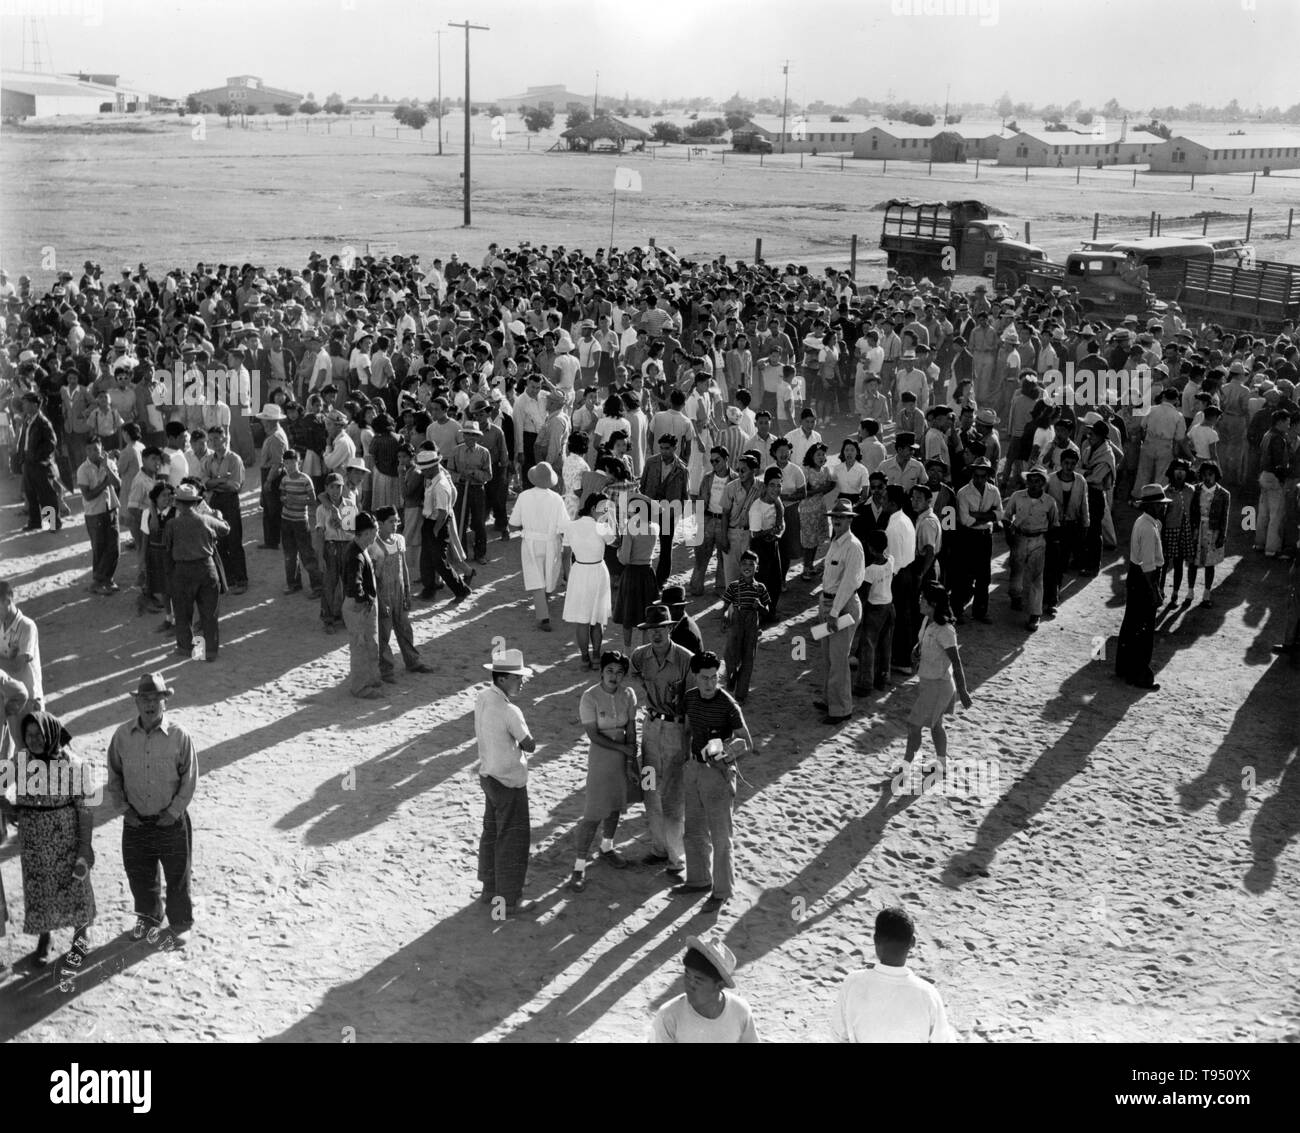 Entitled: 'Japanese-American detainees at an assembly center awaiting transportation to a relocation center.' The internment of Japanese-Americans during WWII was the forced relocation and incarceration in camps of 110,000-120,000 people of Japanese ancestry (62% of the internees were US citizens) ordered by President Roosevelt shortly after Japan's attack on Pearl Harbor. Japanese-Americans were incarcerated based on local population concentrations and regional politics. Stock Photo